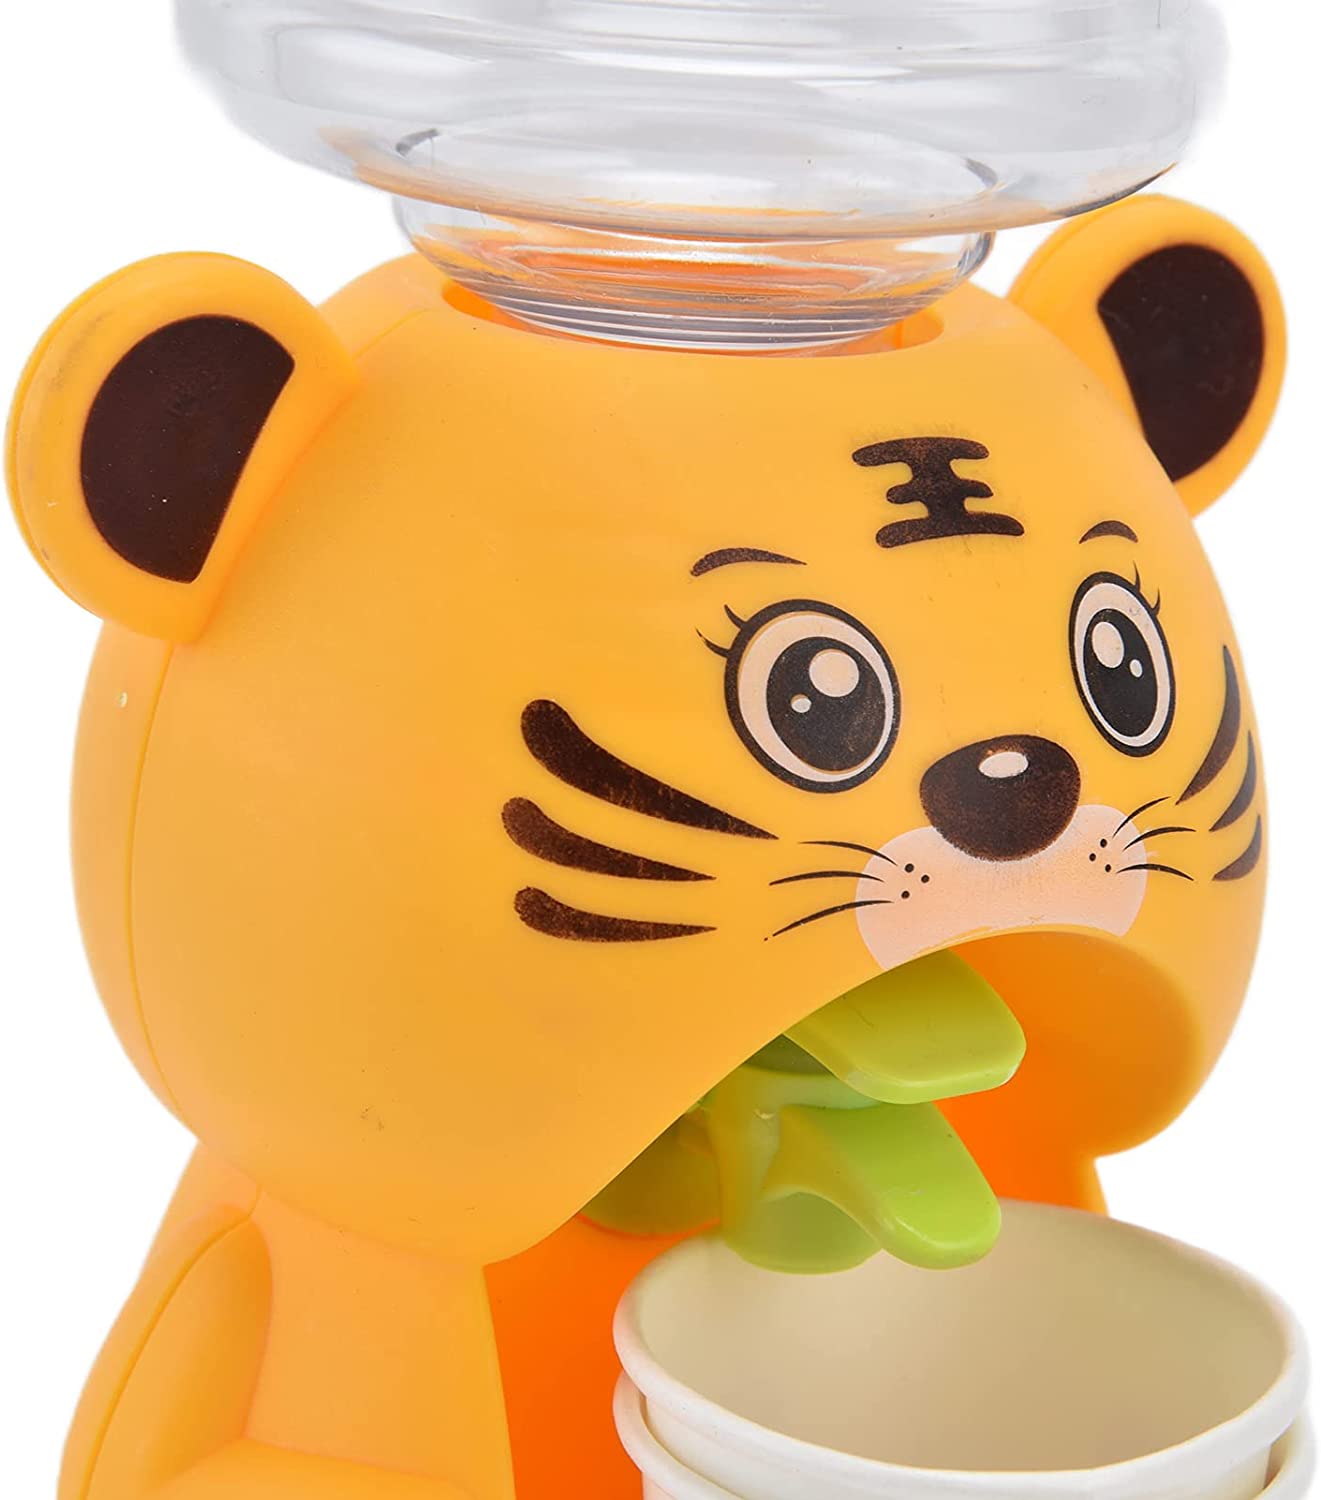 Mini Water Dispenser Cartoon Tiger Water Dispenser For Kids Pretend Play Toys Drinking Water Fountains For Kids Gift